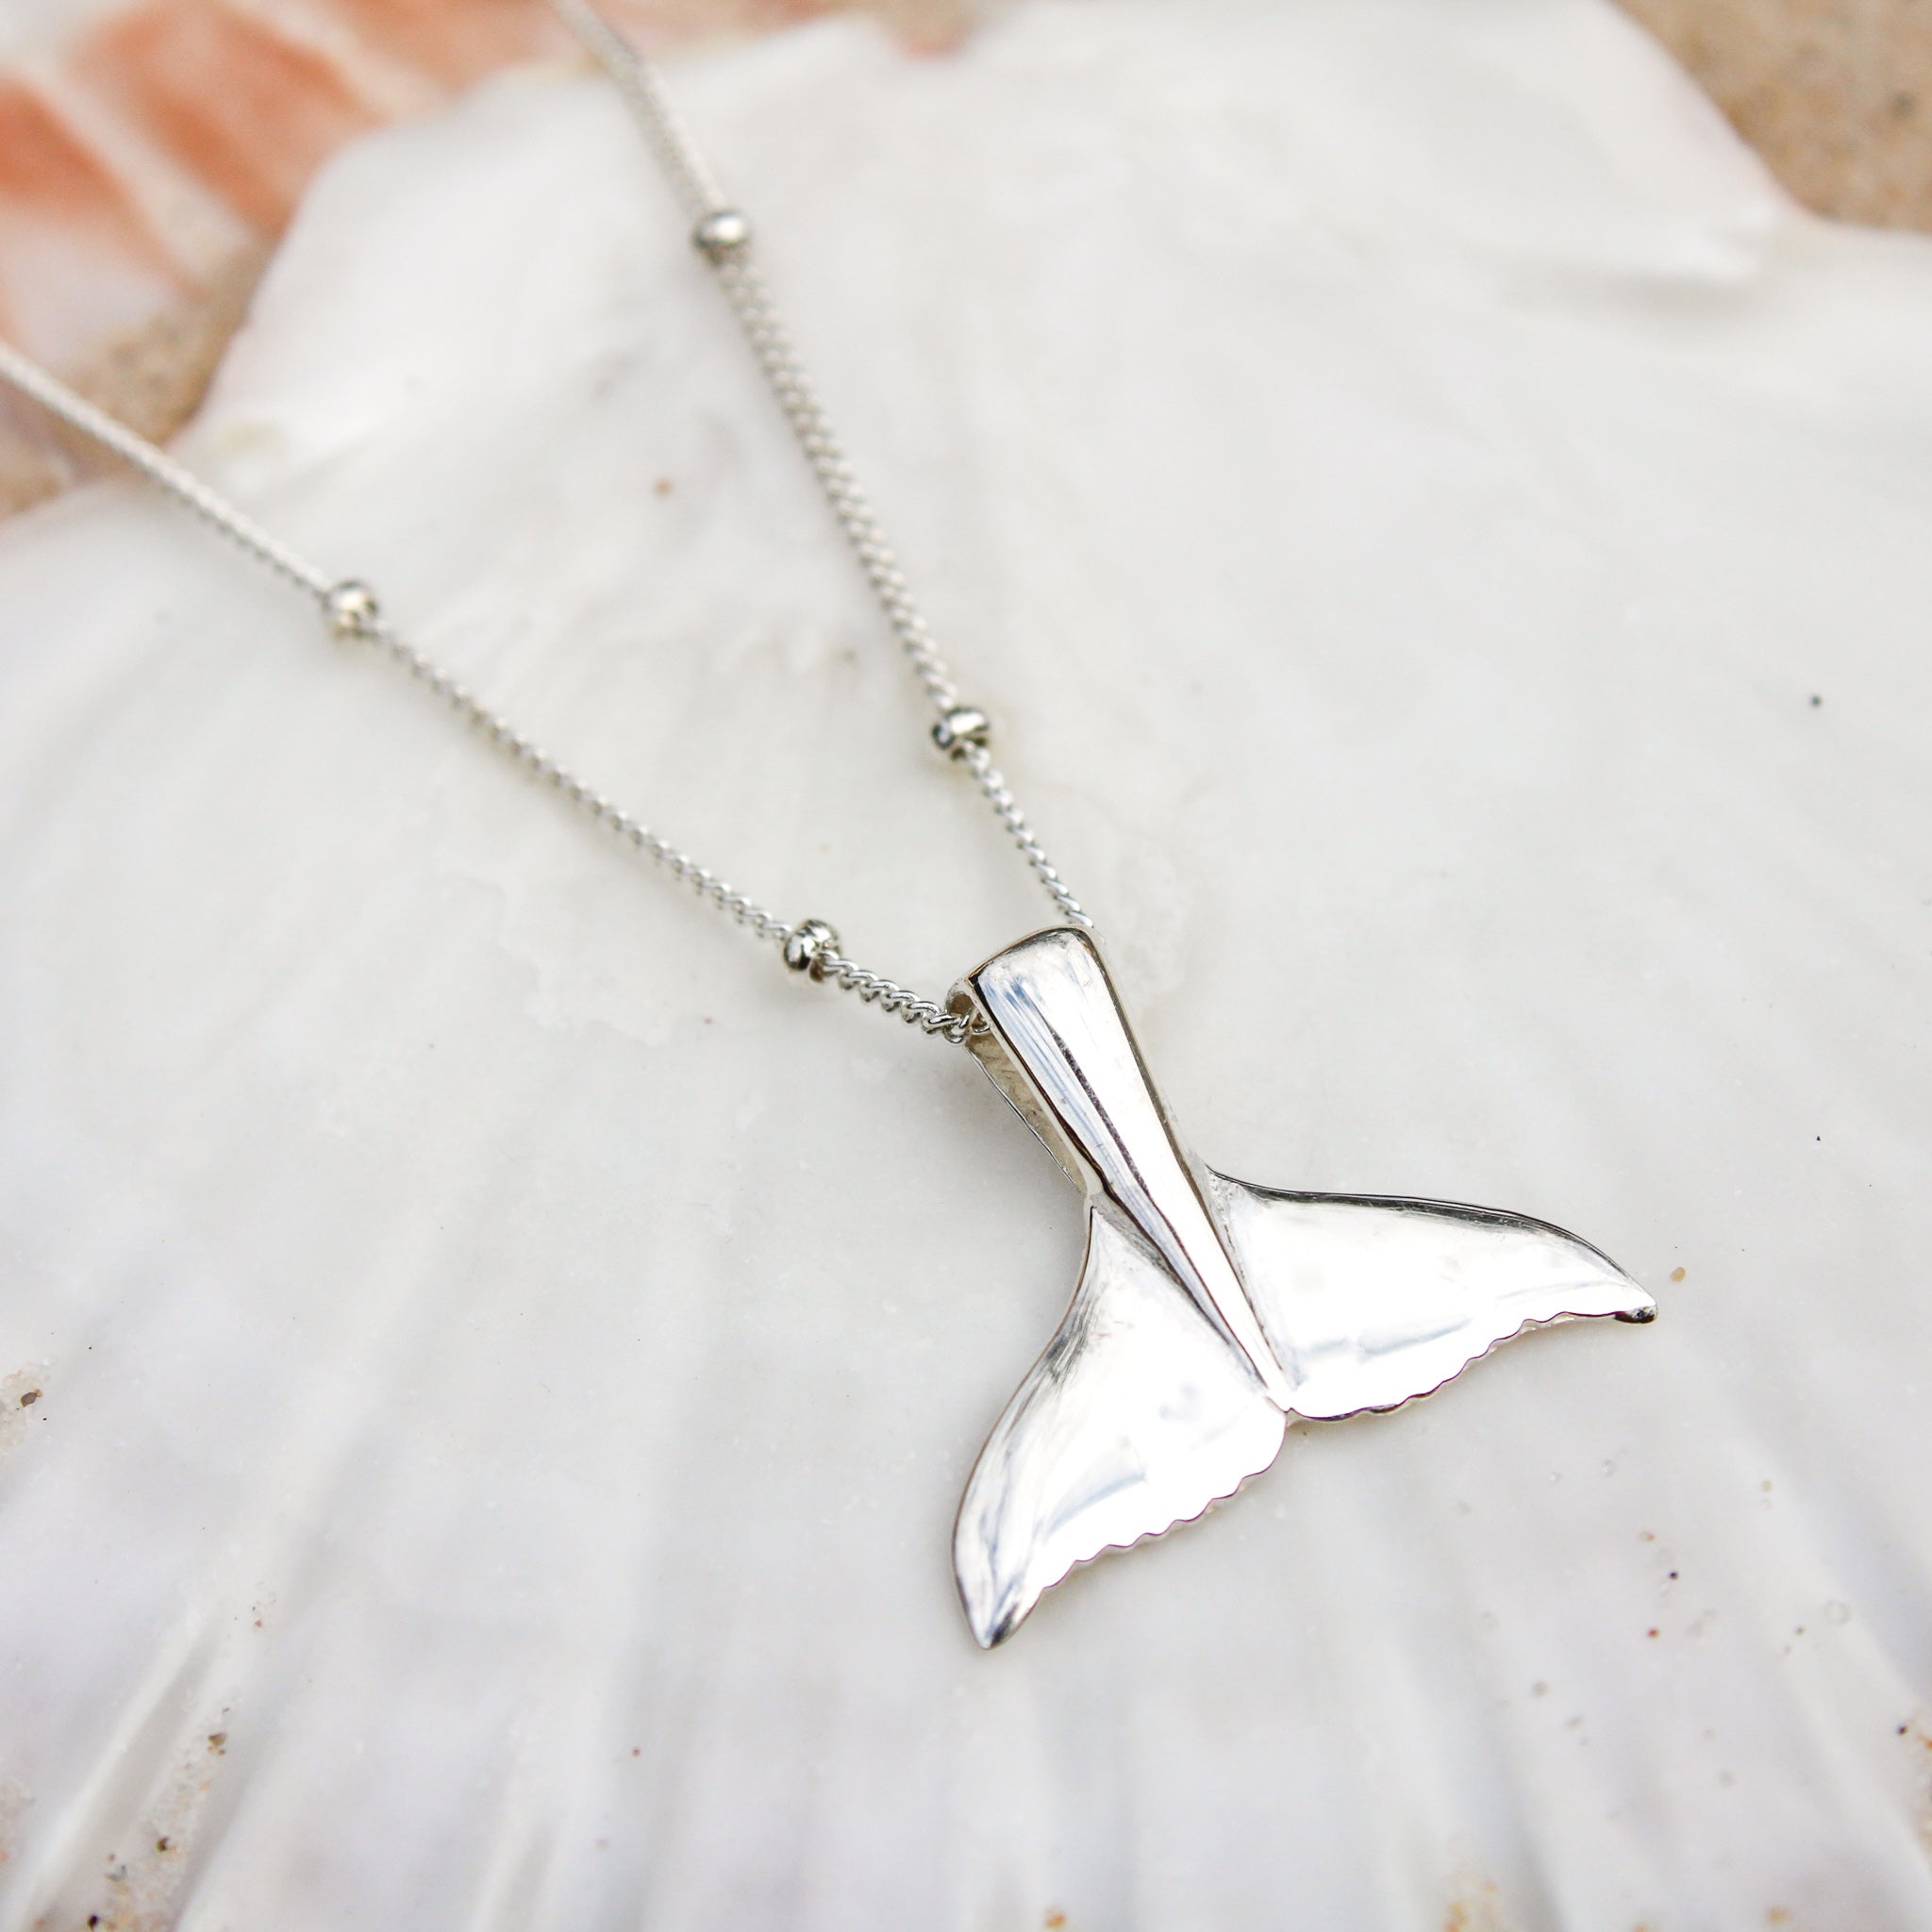 Whale Shark Necklace – Marinelife Mission